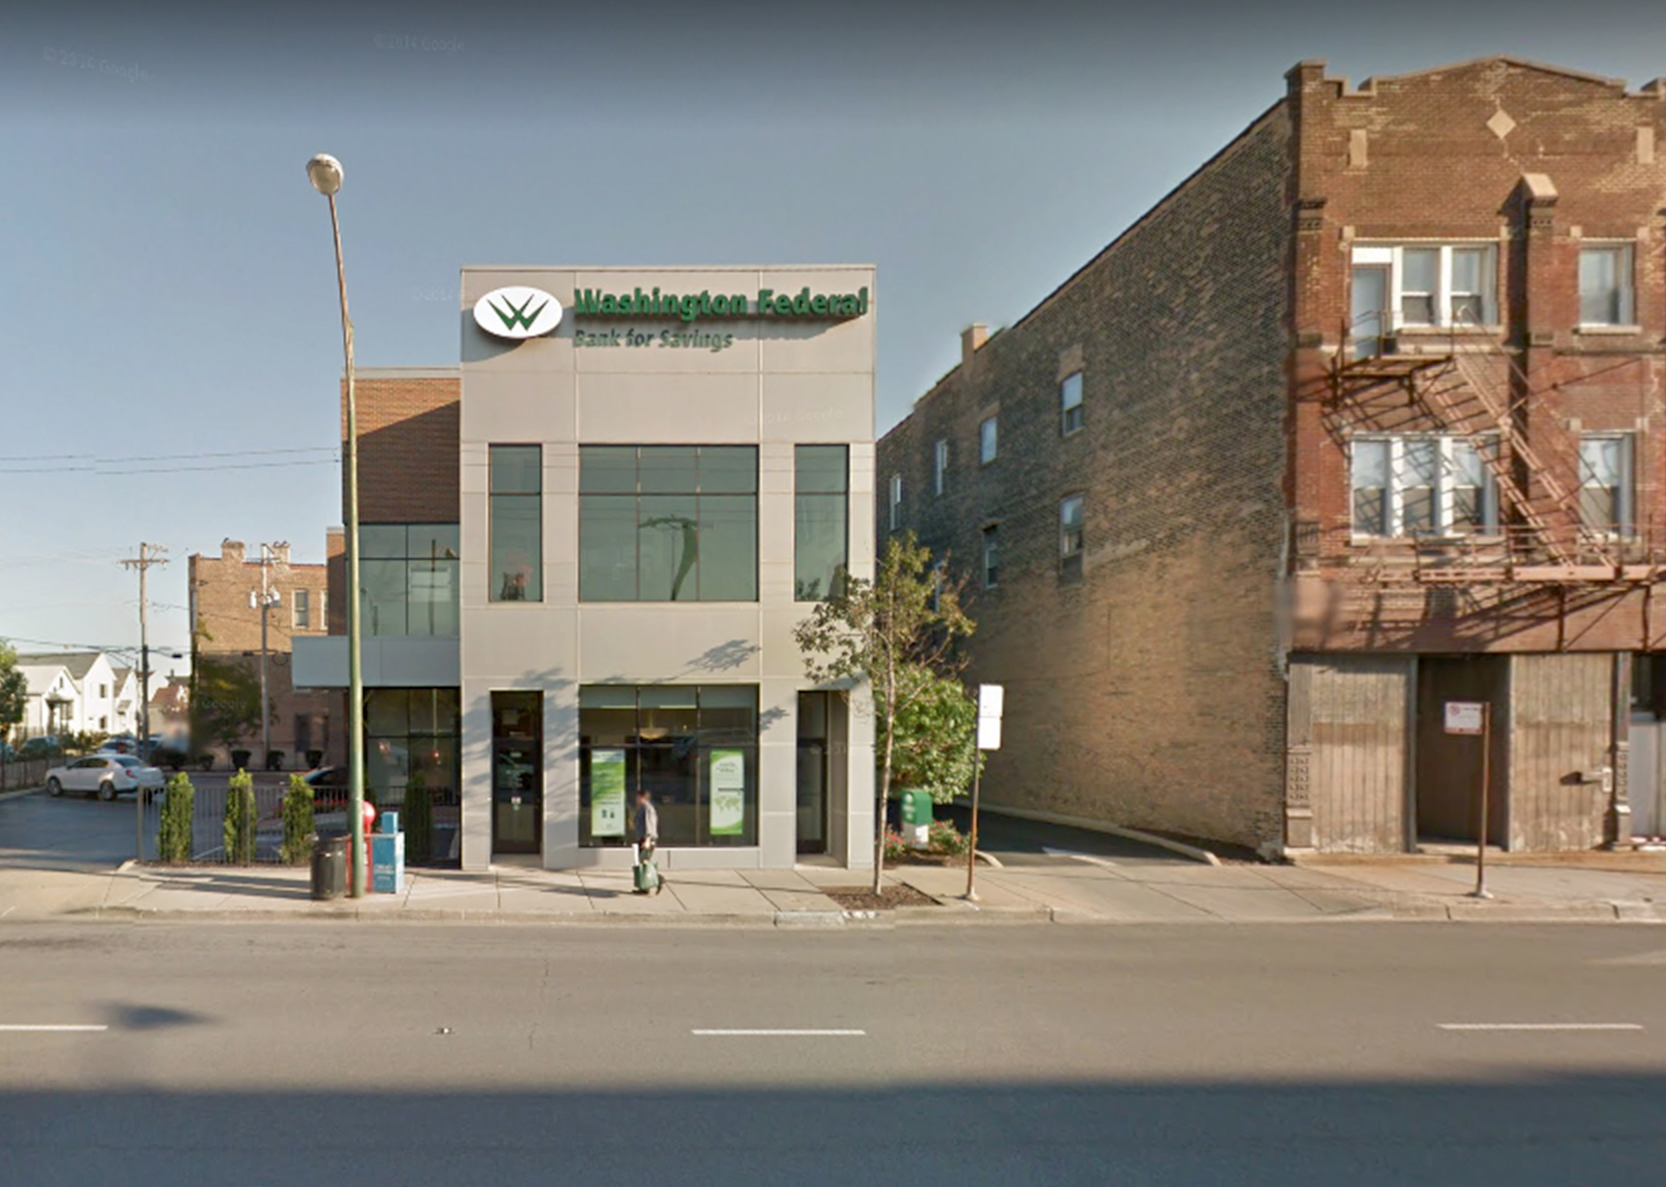 Washington Federal Bank for Savings, 2869 S. Archer Ave., was shut down in December 2017 for “unsafe or unsound practices” days after its president was found dead in what was ruled a suicide. A federal audit later uncovered an $82.6 million fraud at the bank.